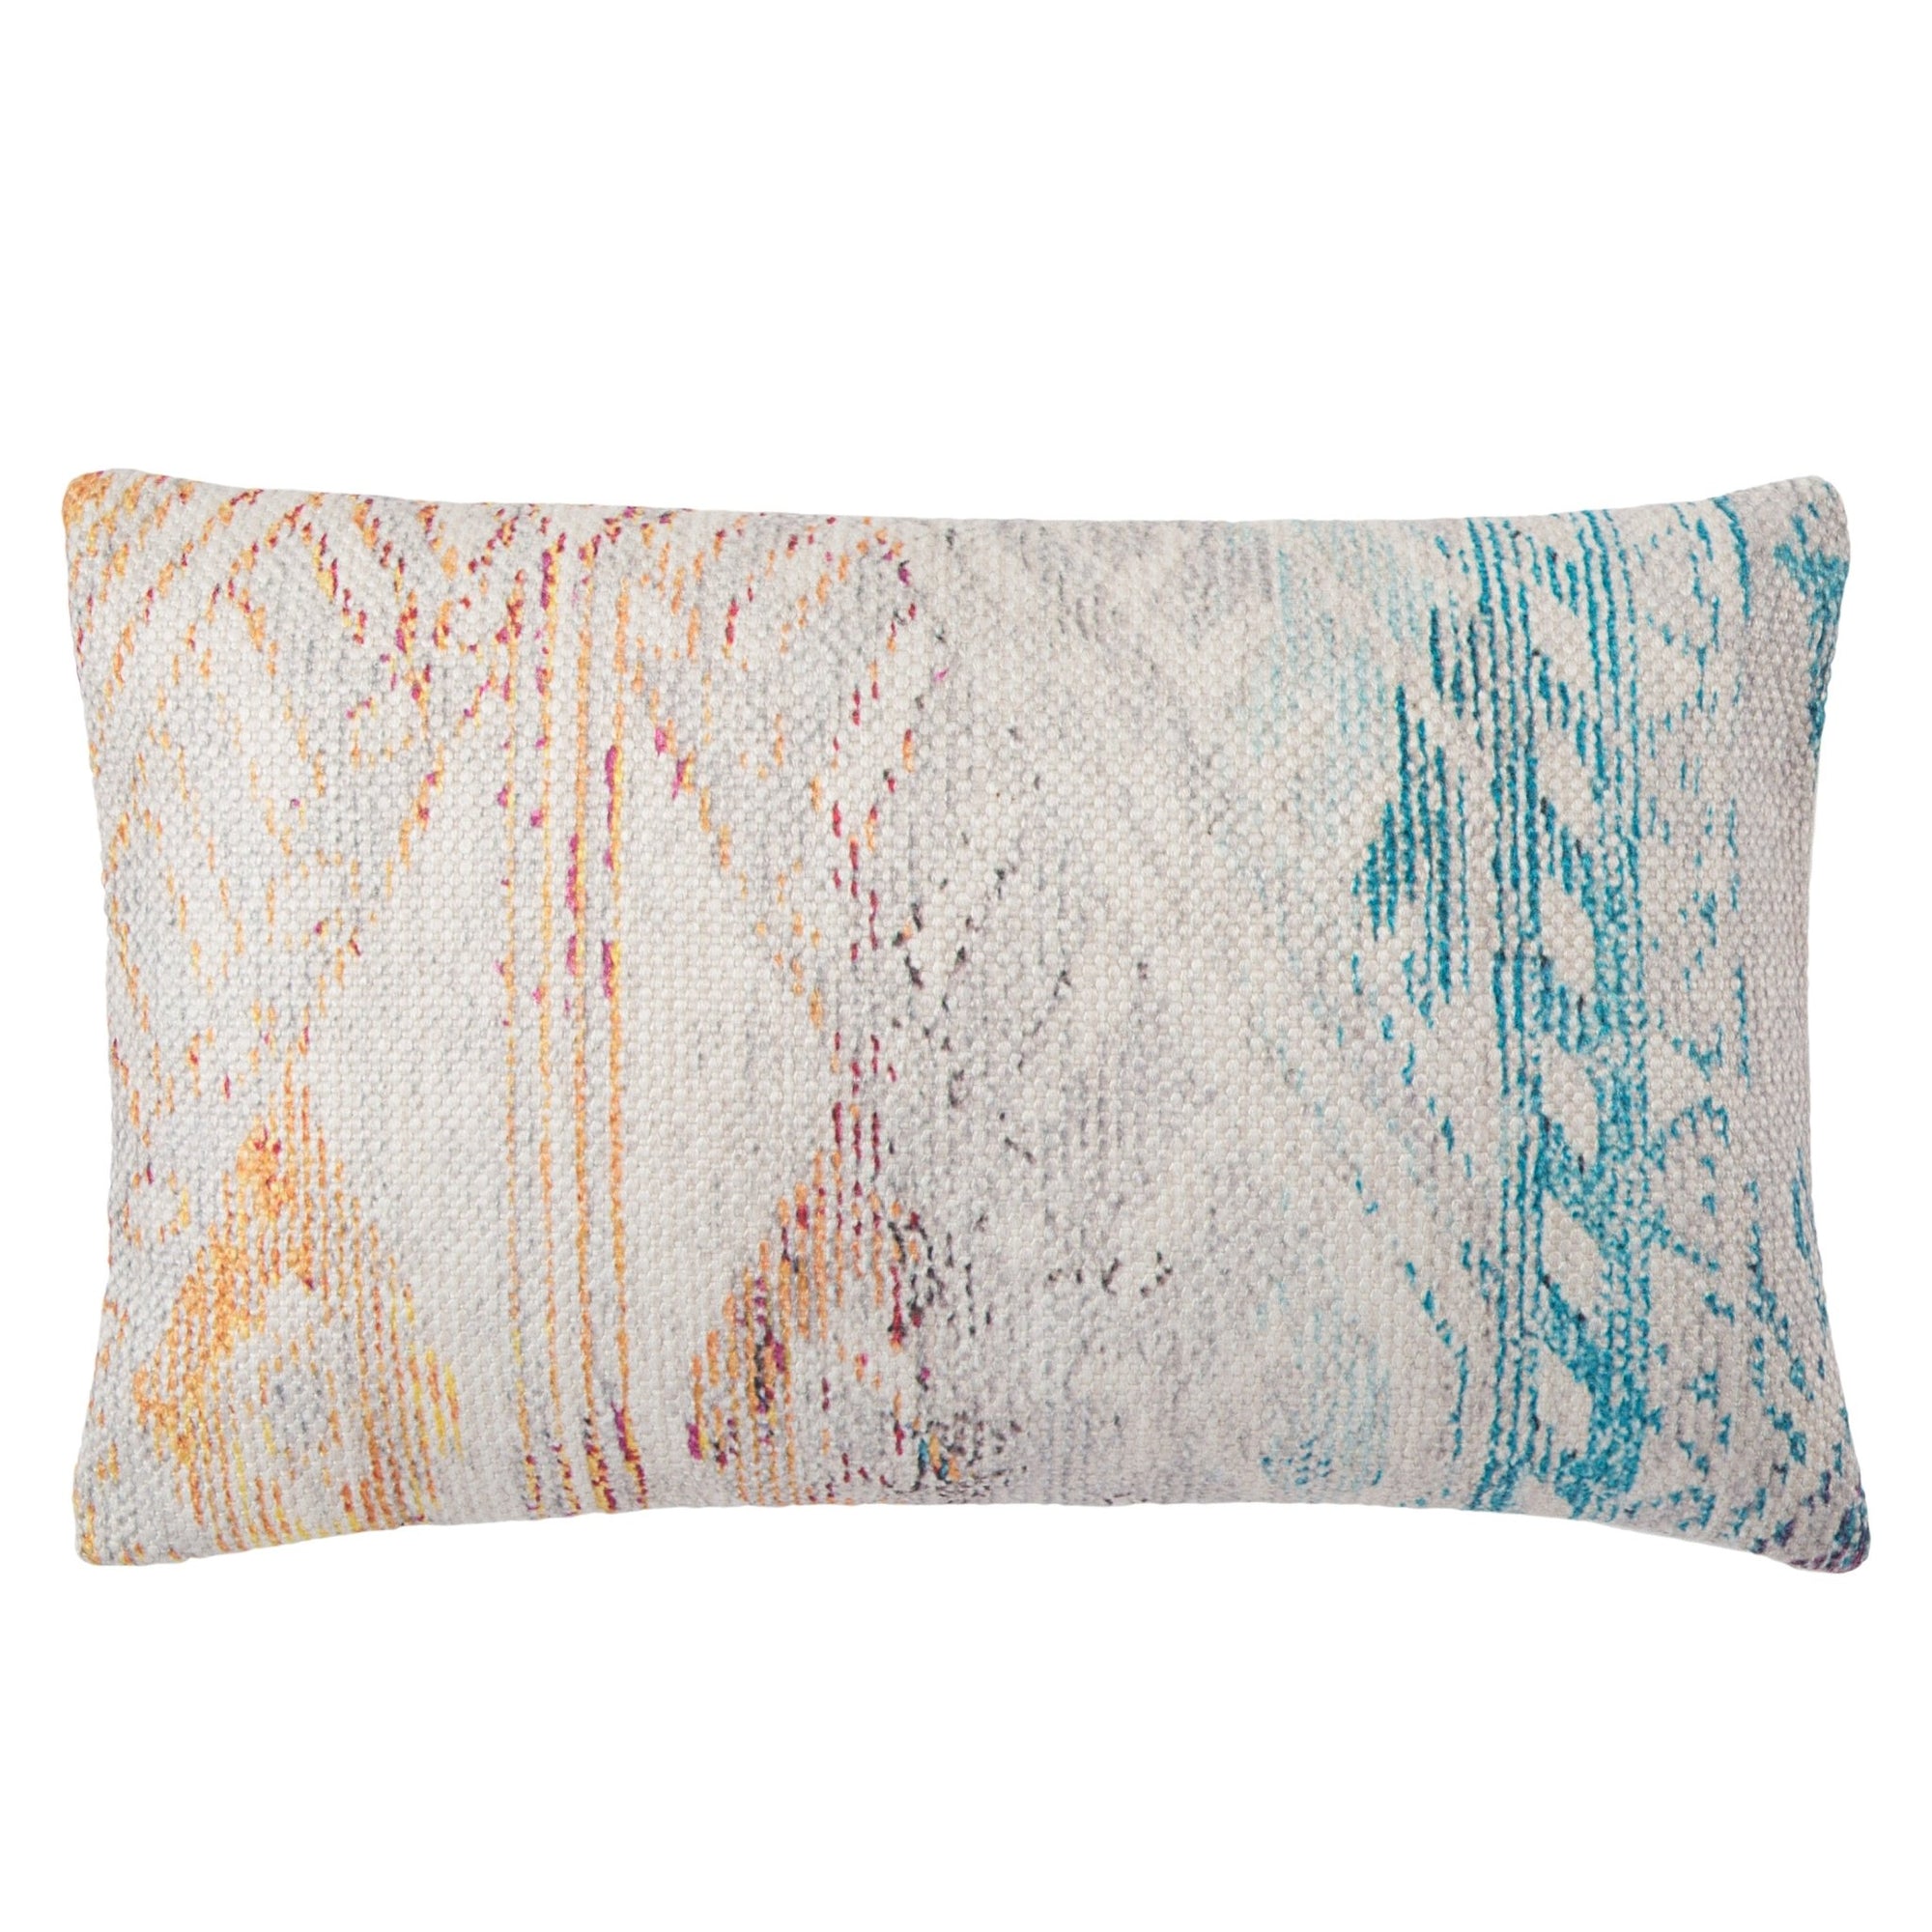 Groove By Nikki Chu Grn03 Tribe Multicolor/White Pillow - Rug & Home